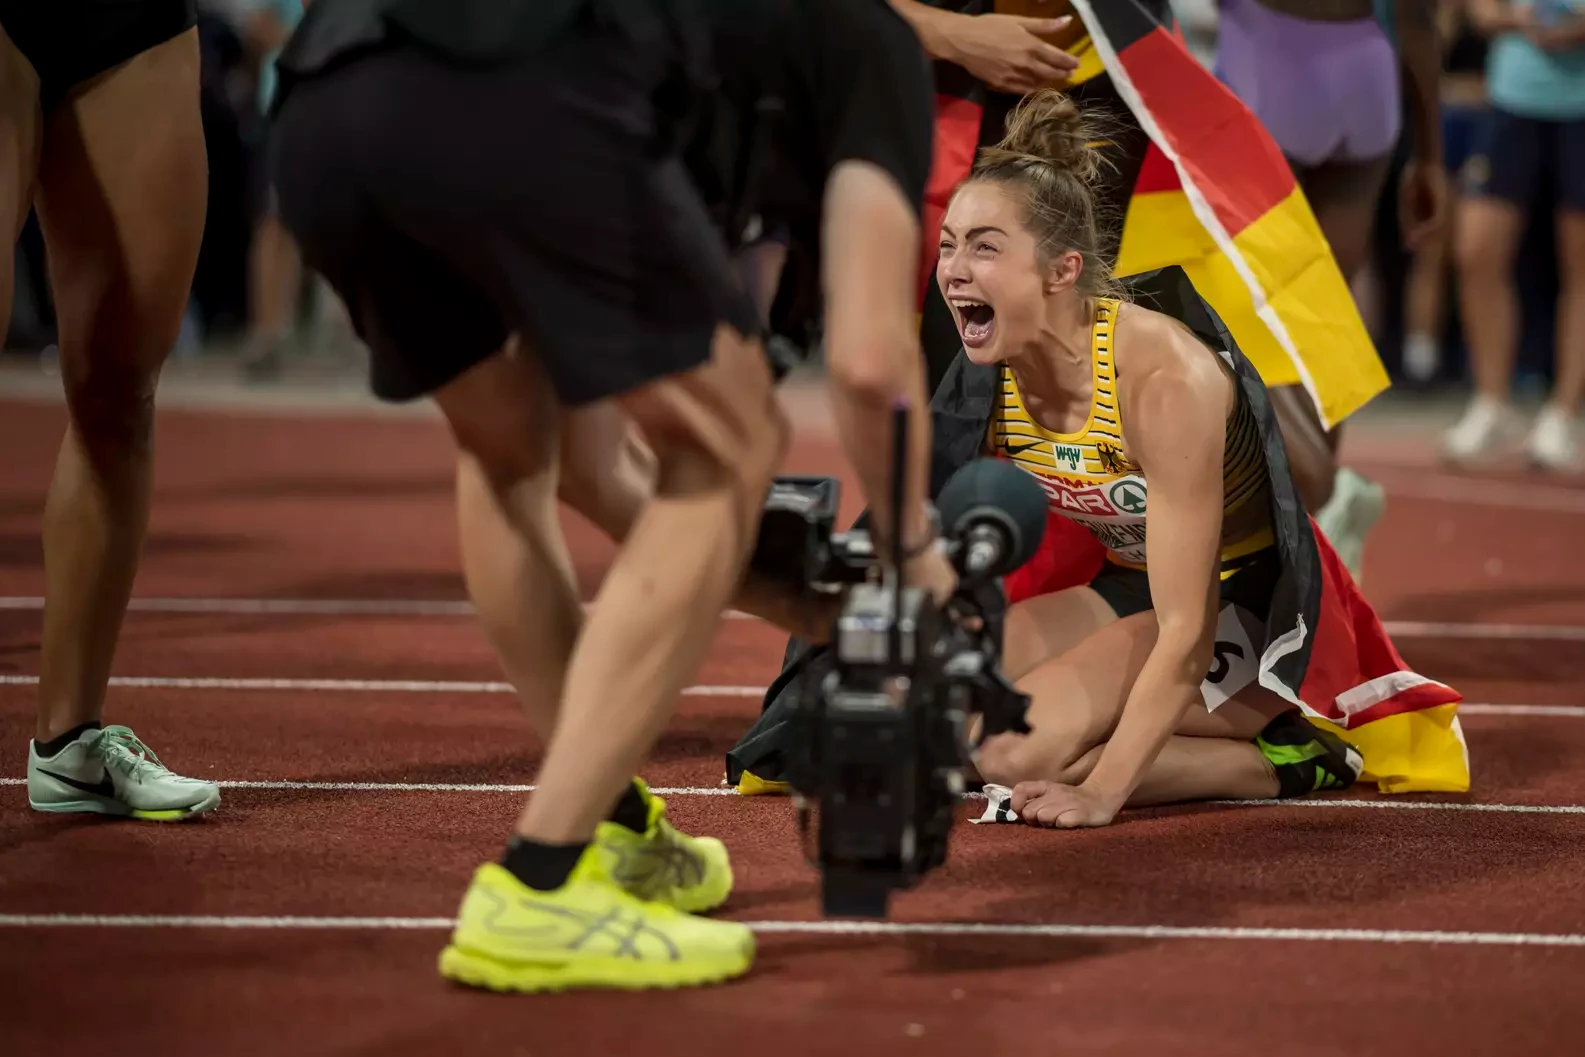 Gina Luckenkemper reacts after winning the European Championships 100m titles